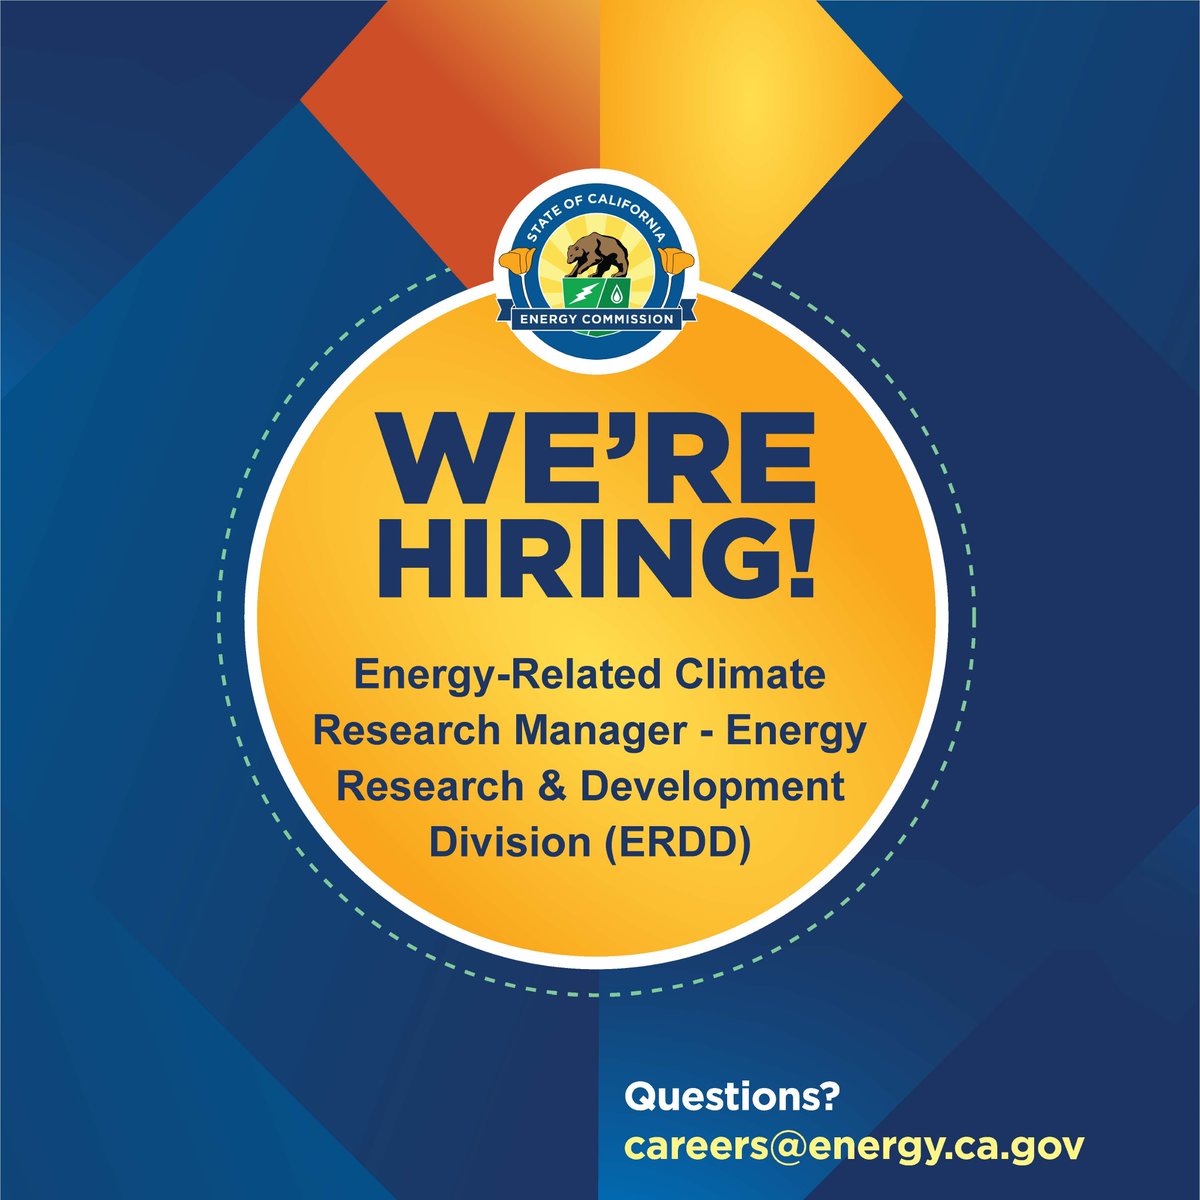 ⚡#CalEnergy is hiring an Energy-Related Climate Research Manager for the Sustainability & Health Unit within the Energy Research & Development Division (ERDD). 🌳This position will evaluate climate-related risks to the energy sector. 📅Apply by 6/6: bit.ly/3USBMur